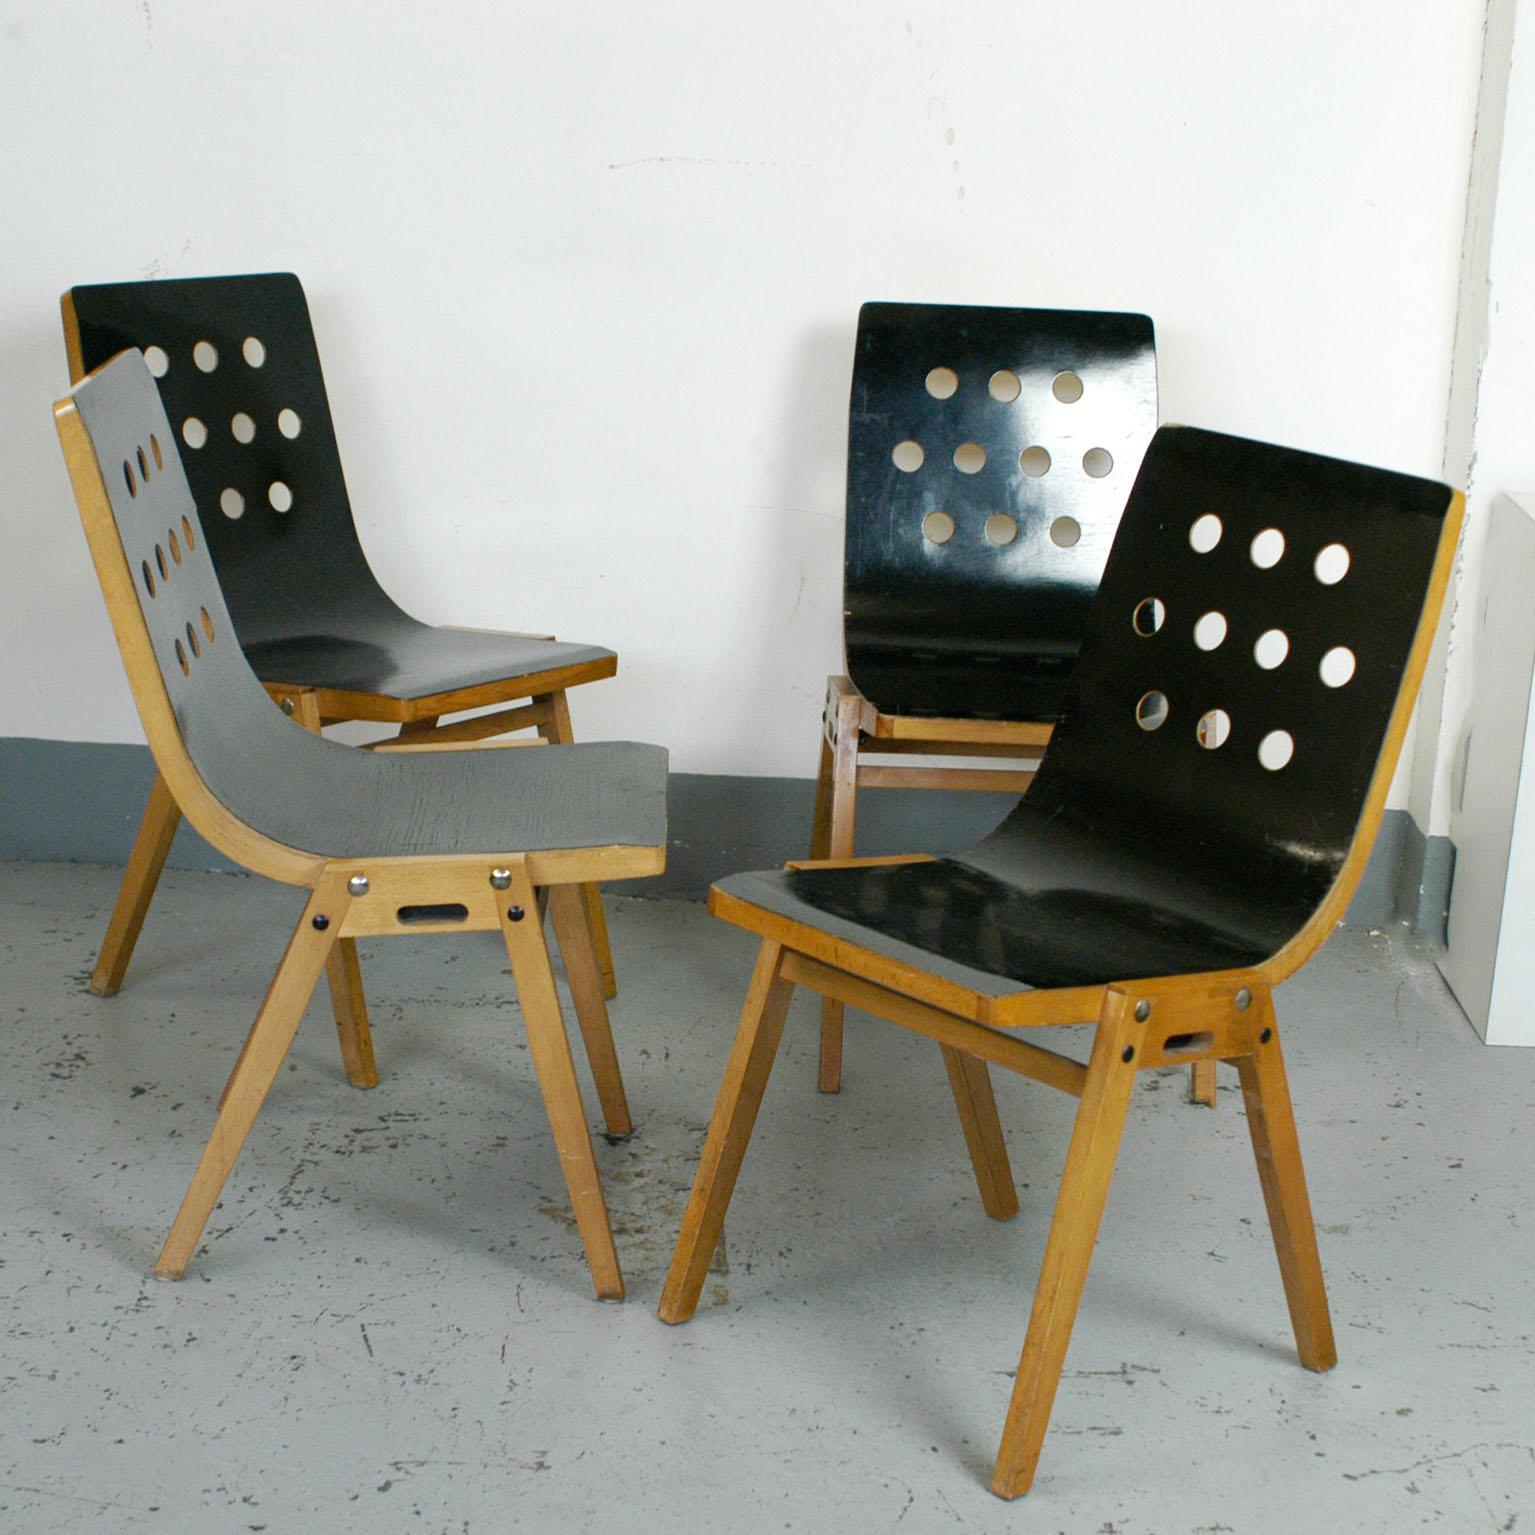 A set of four stackable chairs designed by Prof. Roland Rainer in 1951 and manufactured by Emil & Alfred Pollak, Austria, in 1950s.
Roland Rainer used these chairs for the Viennese city hall 